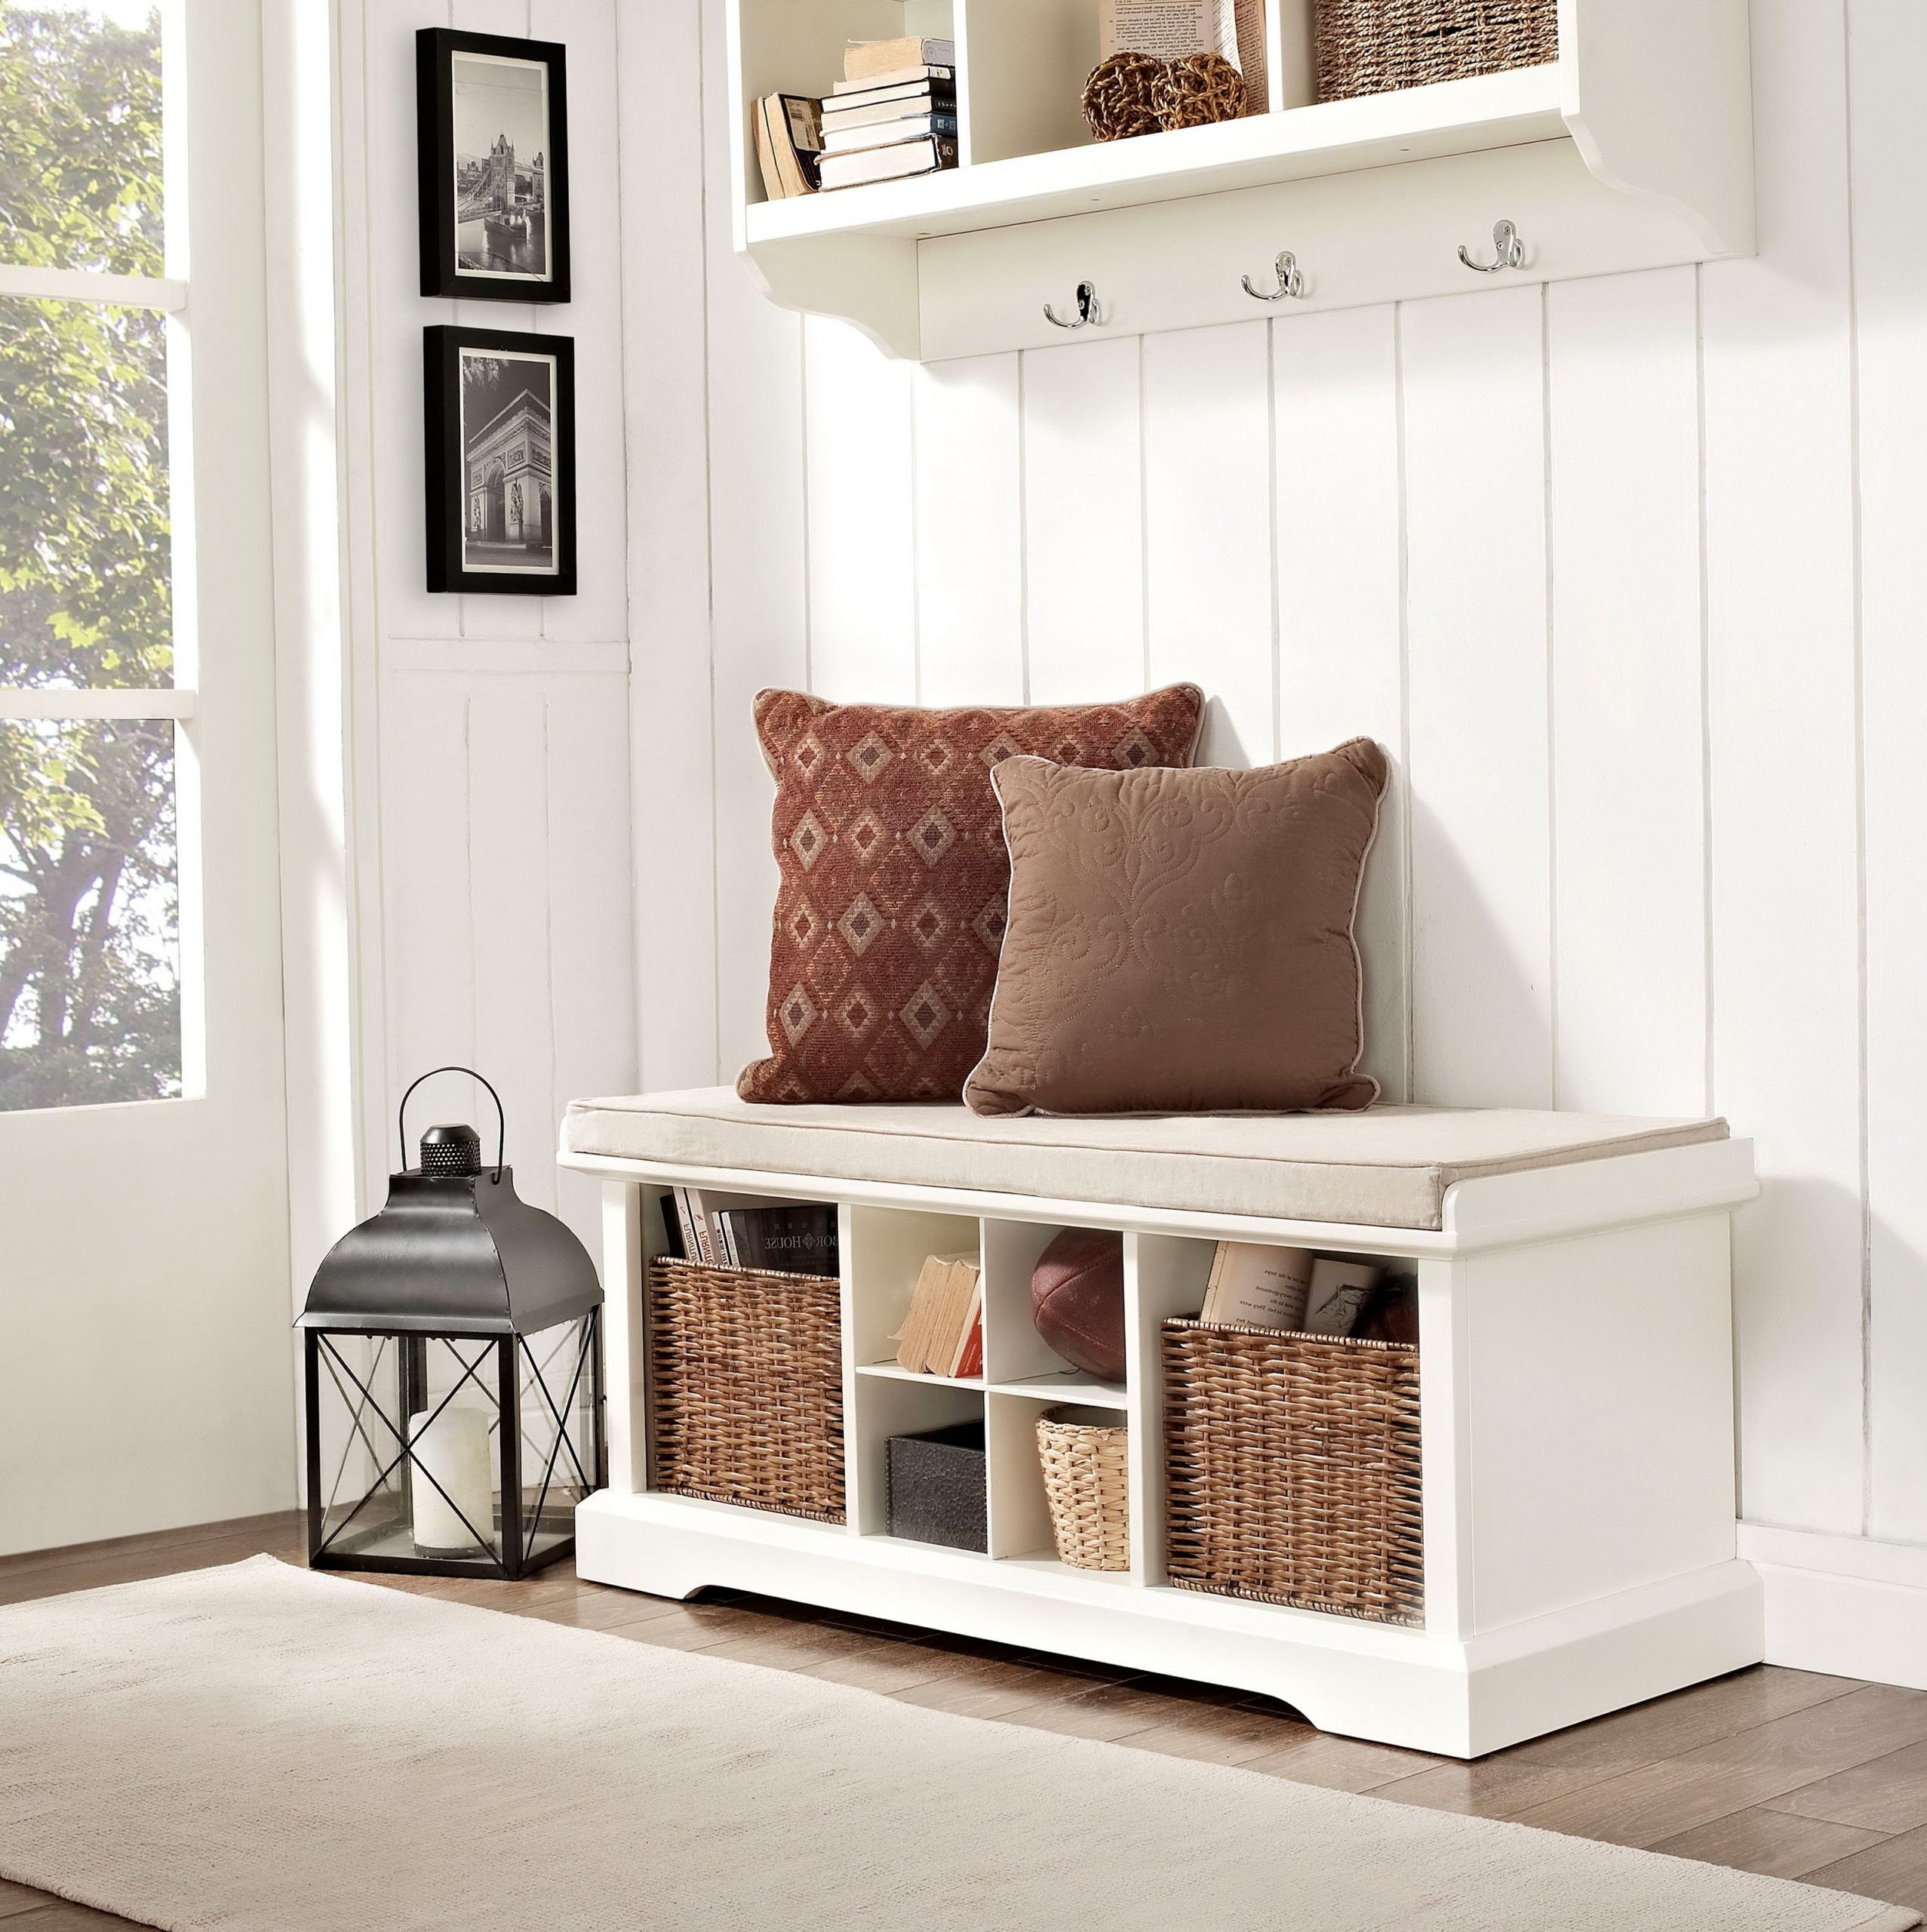 Front Entryway Storage Bench
 White Storage Bench With Cubbies